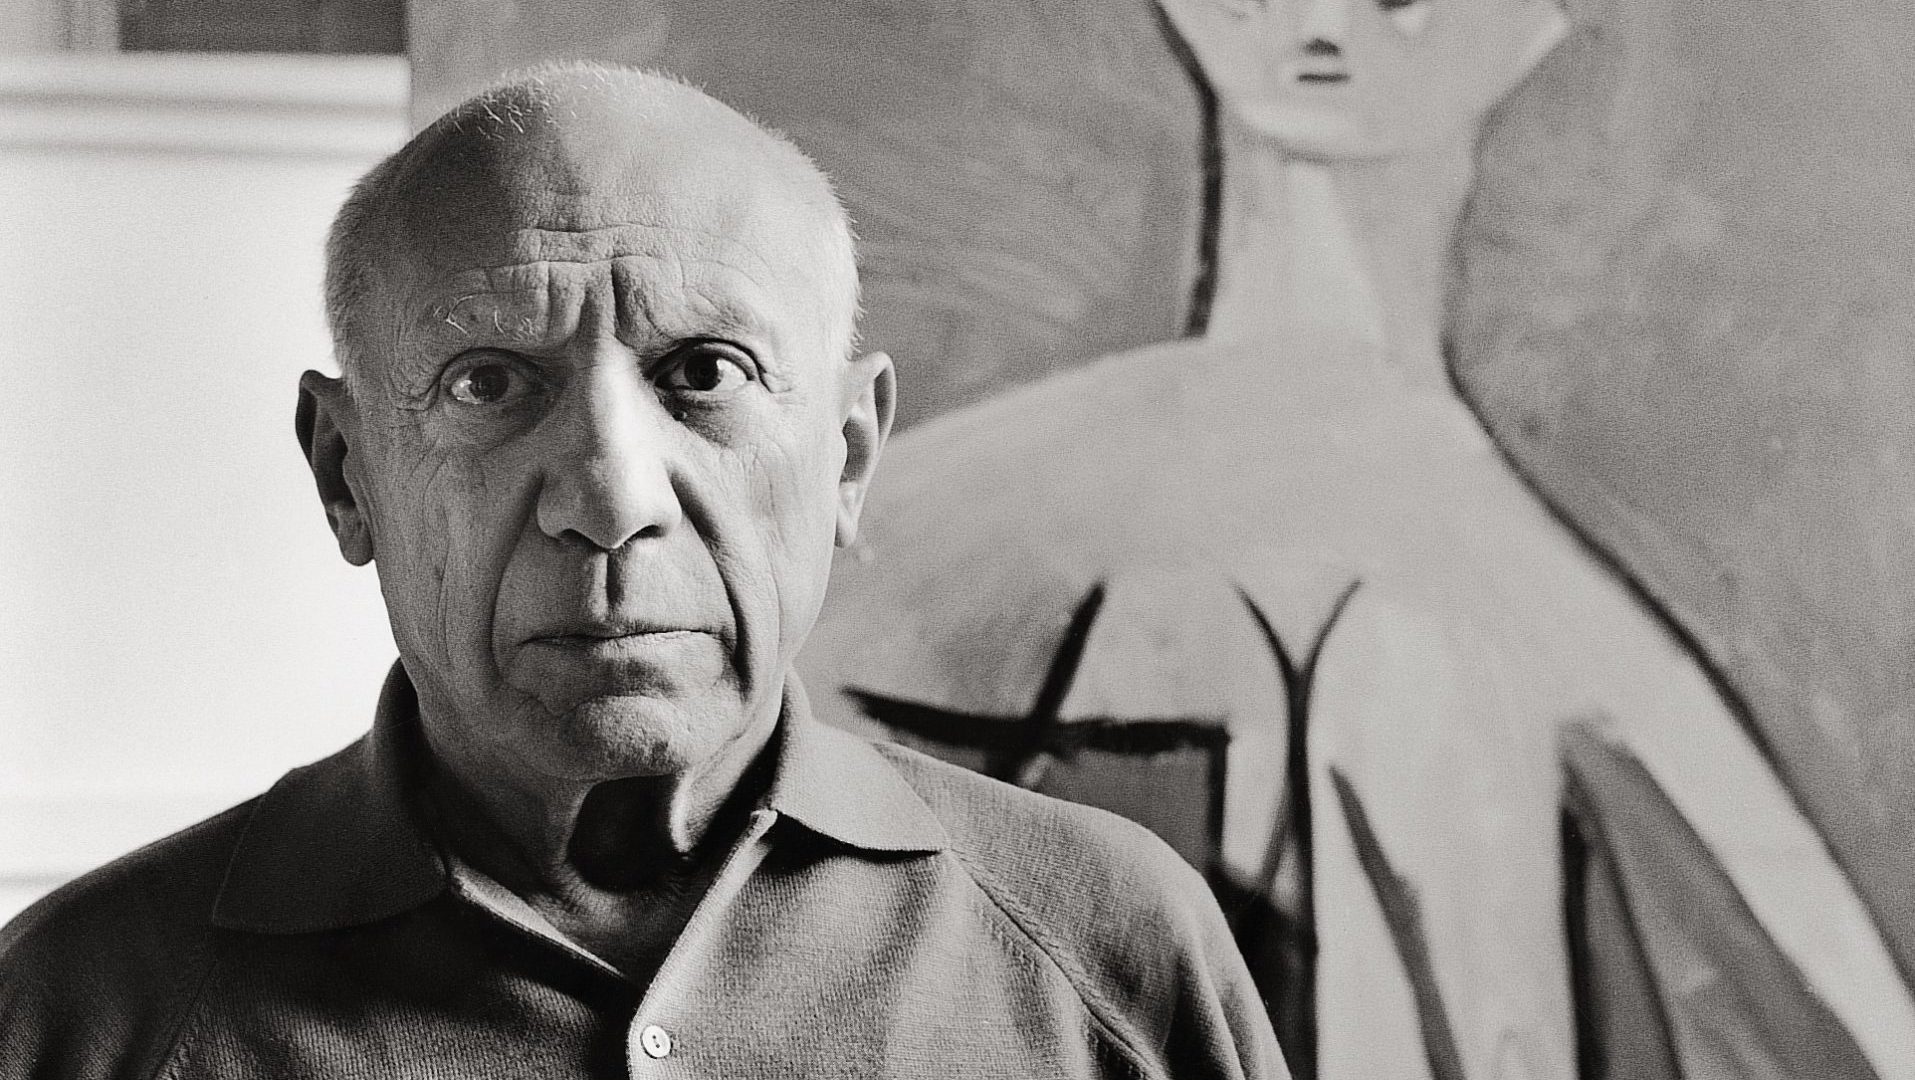 Pablo Picasso in his mansion in Cannes, 1957. Photo: Imagno